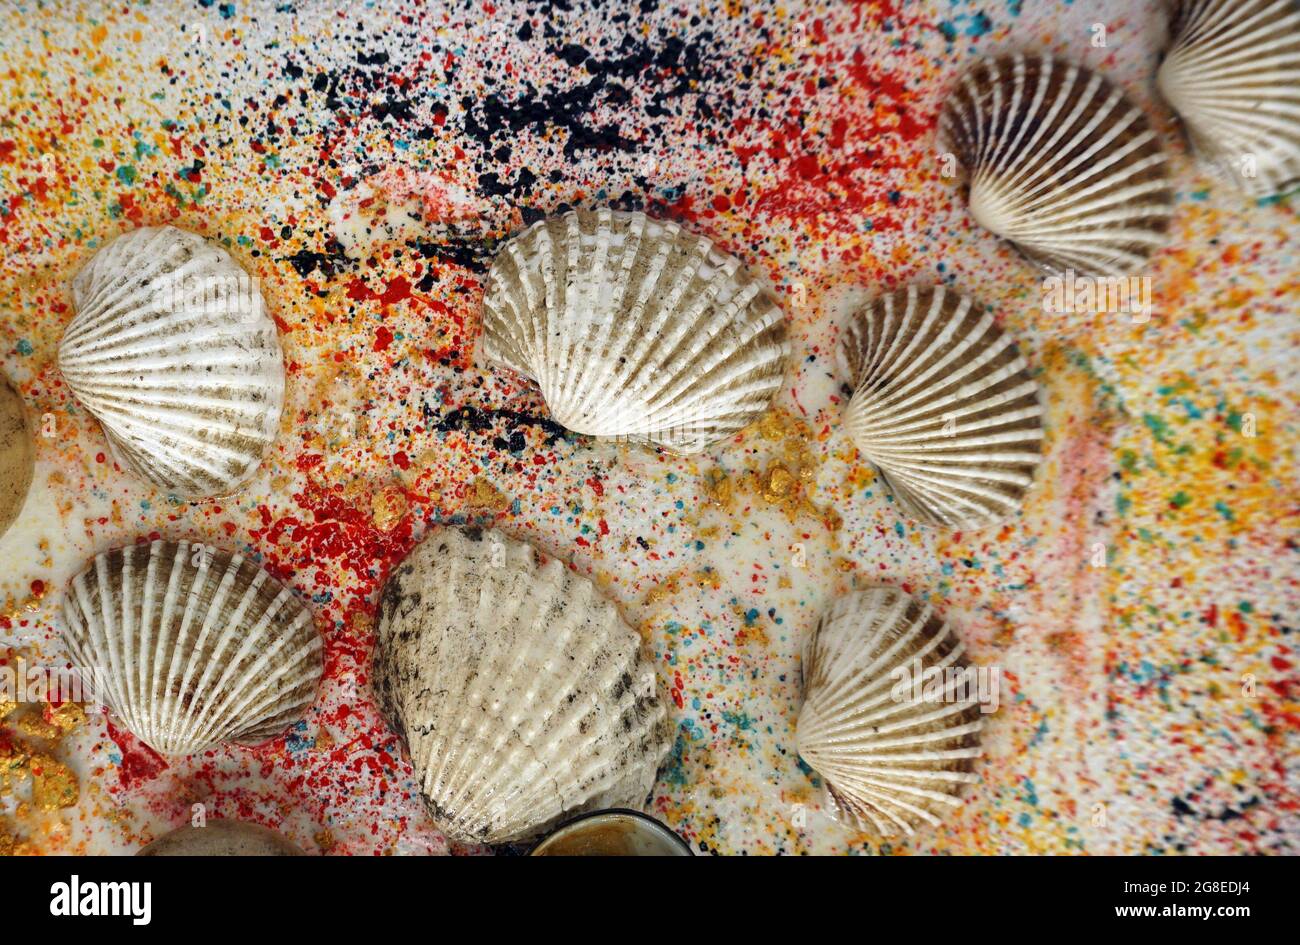 Mixed media art, a variety of shells on the background disappearing colors Stock Photo